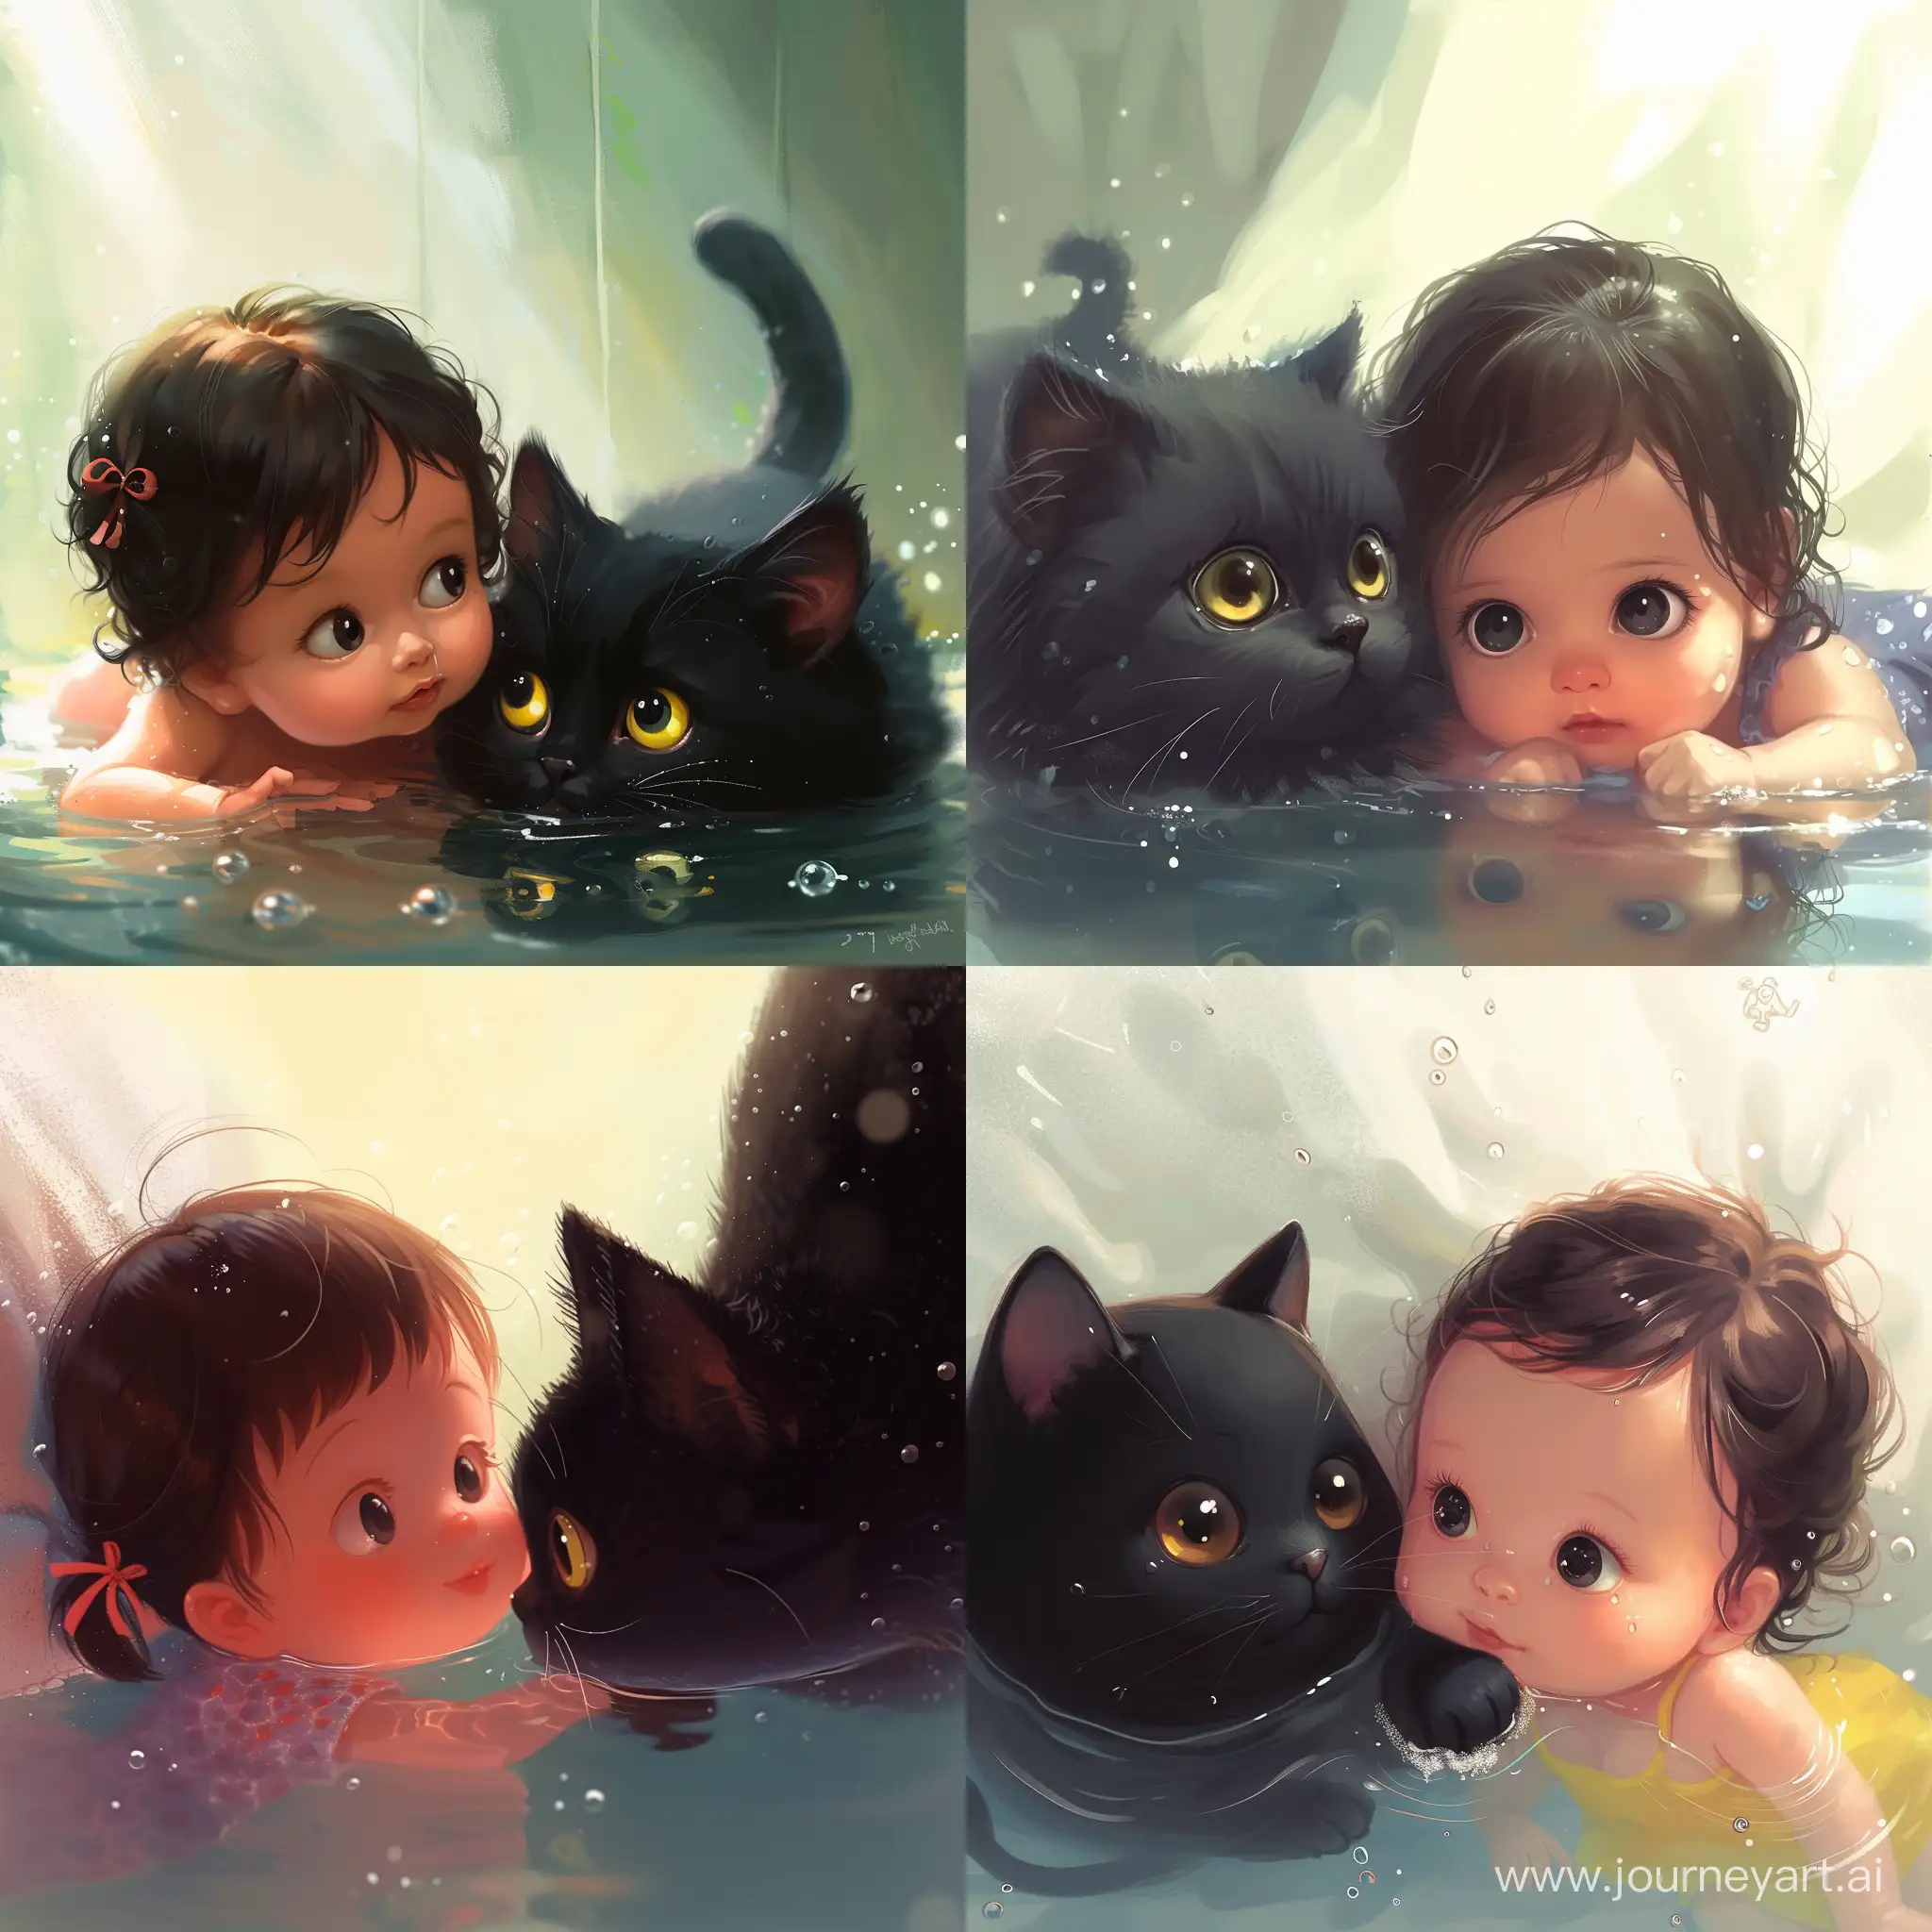 Adorable-AnimeInspired-Scene-Baby-Girl-and-Black-Cat-in-Chibi-Kawaii-Style